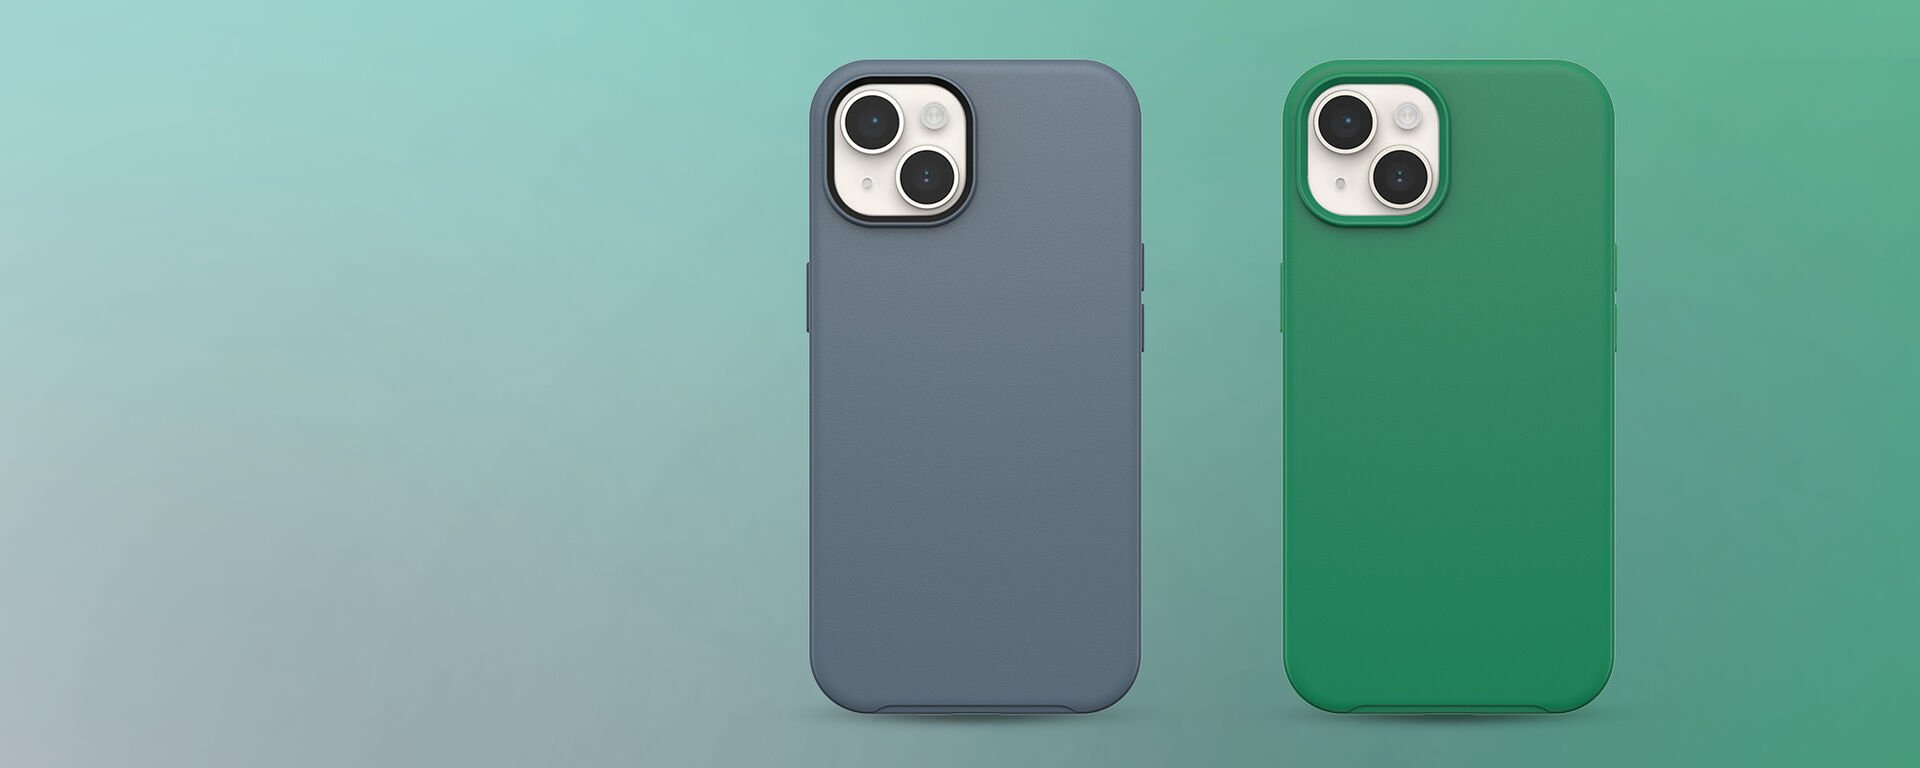 Blue and green slim iPhone cases